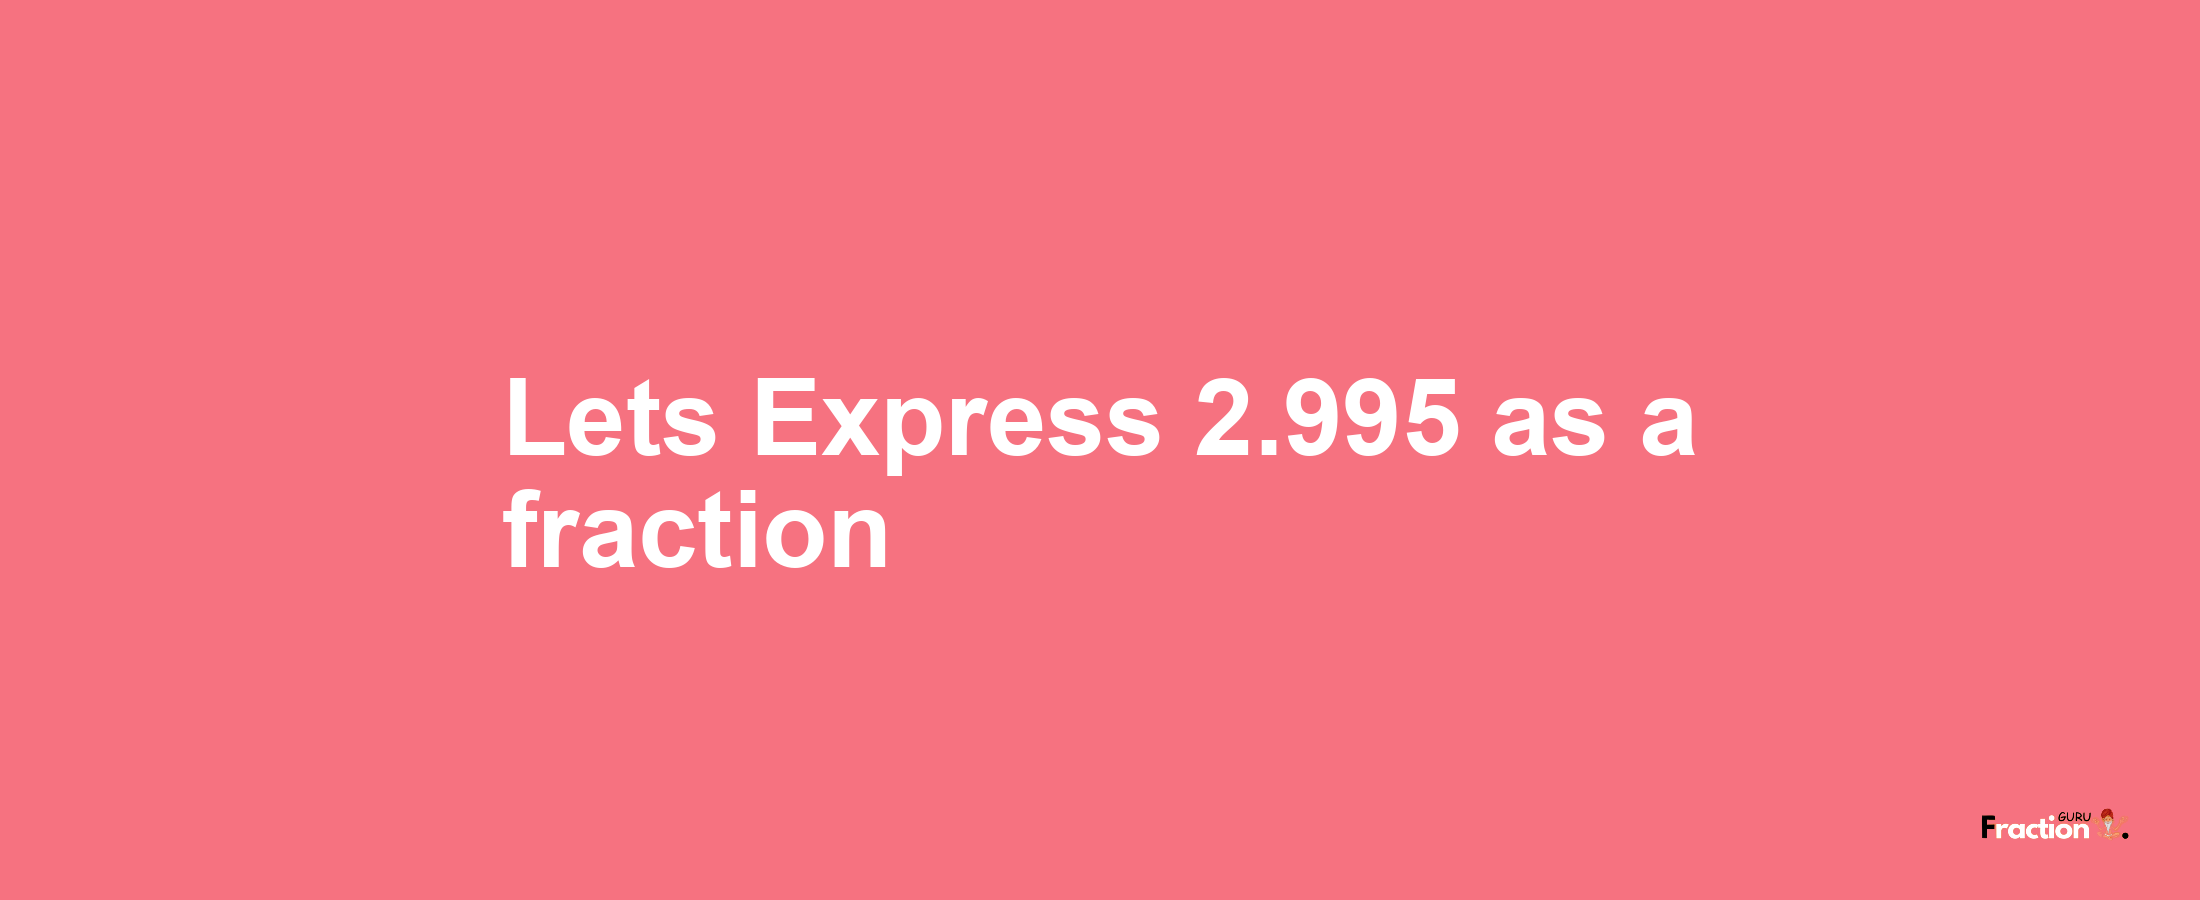 Lets Express 2.995 as afraction